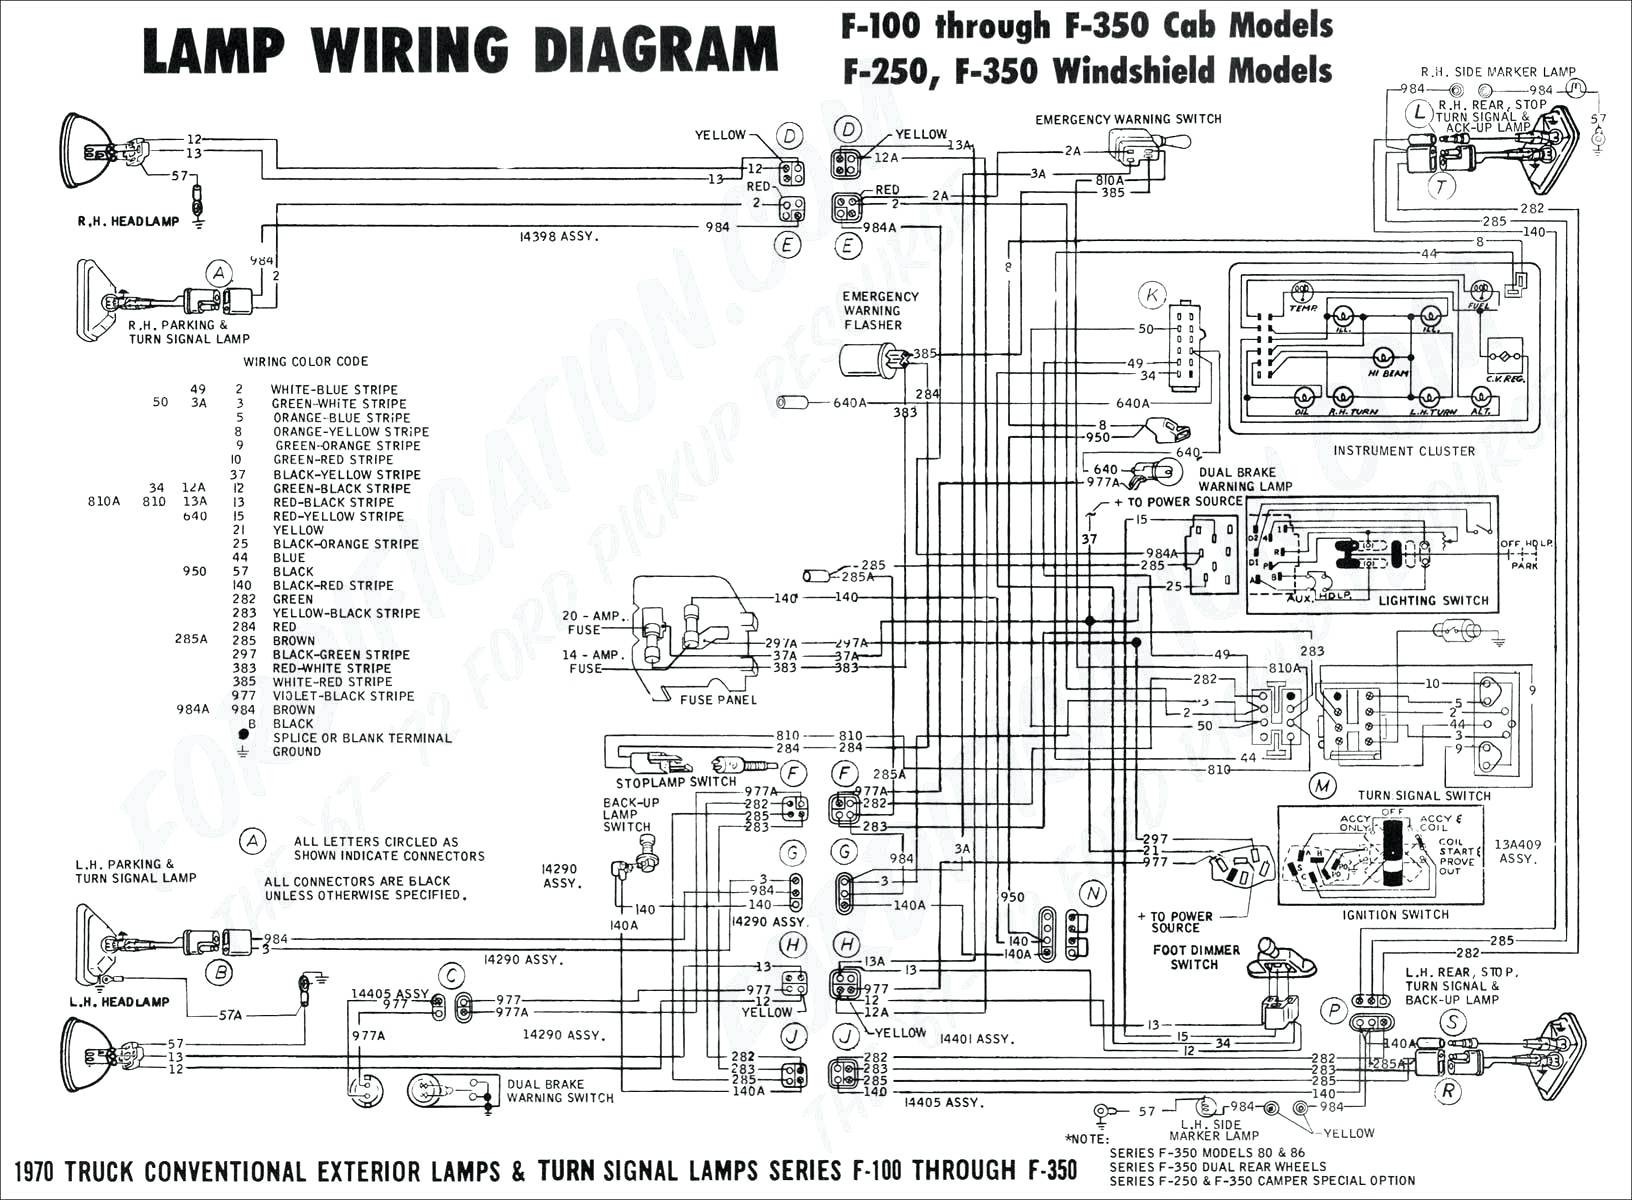 Wiring Diagram for Cars ford Ignition Switch Wiring Diagram Fresh top Car Brake Diagram Rear Of Wiring Diagram for Cars